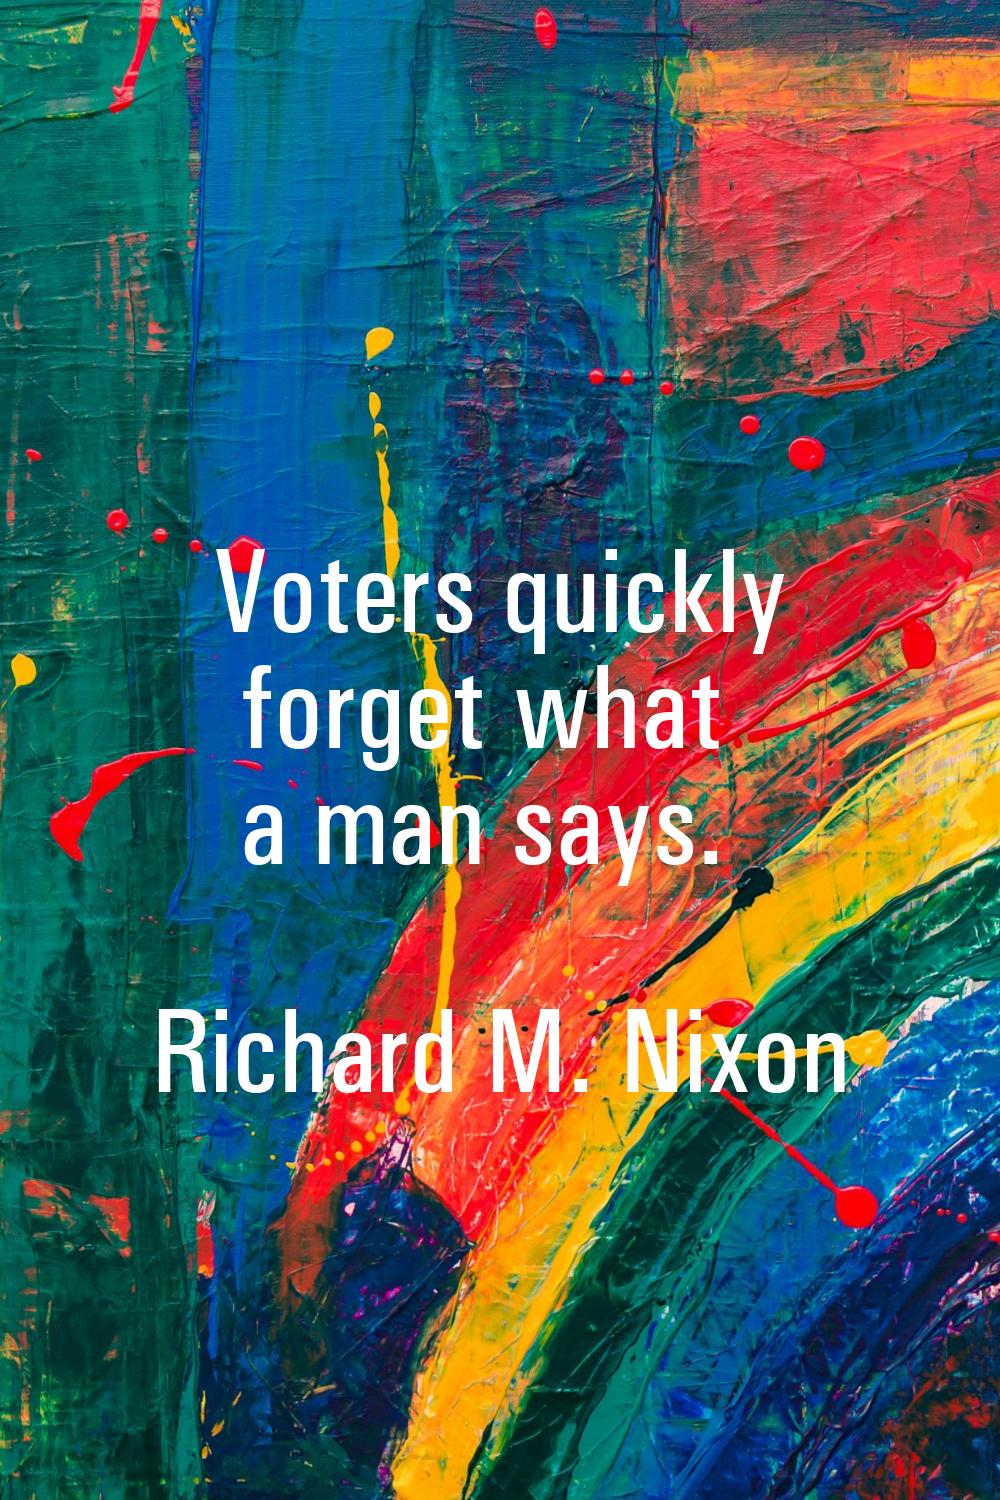 Voters quickly forget what a man says.